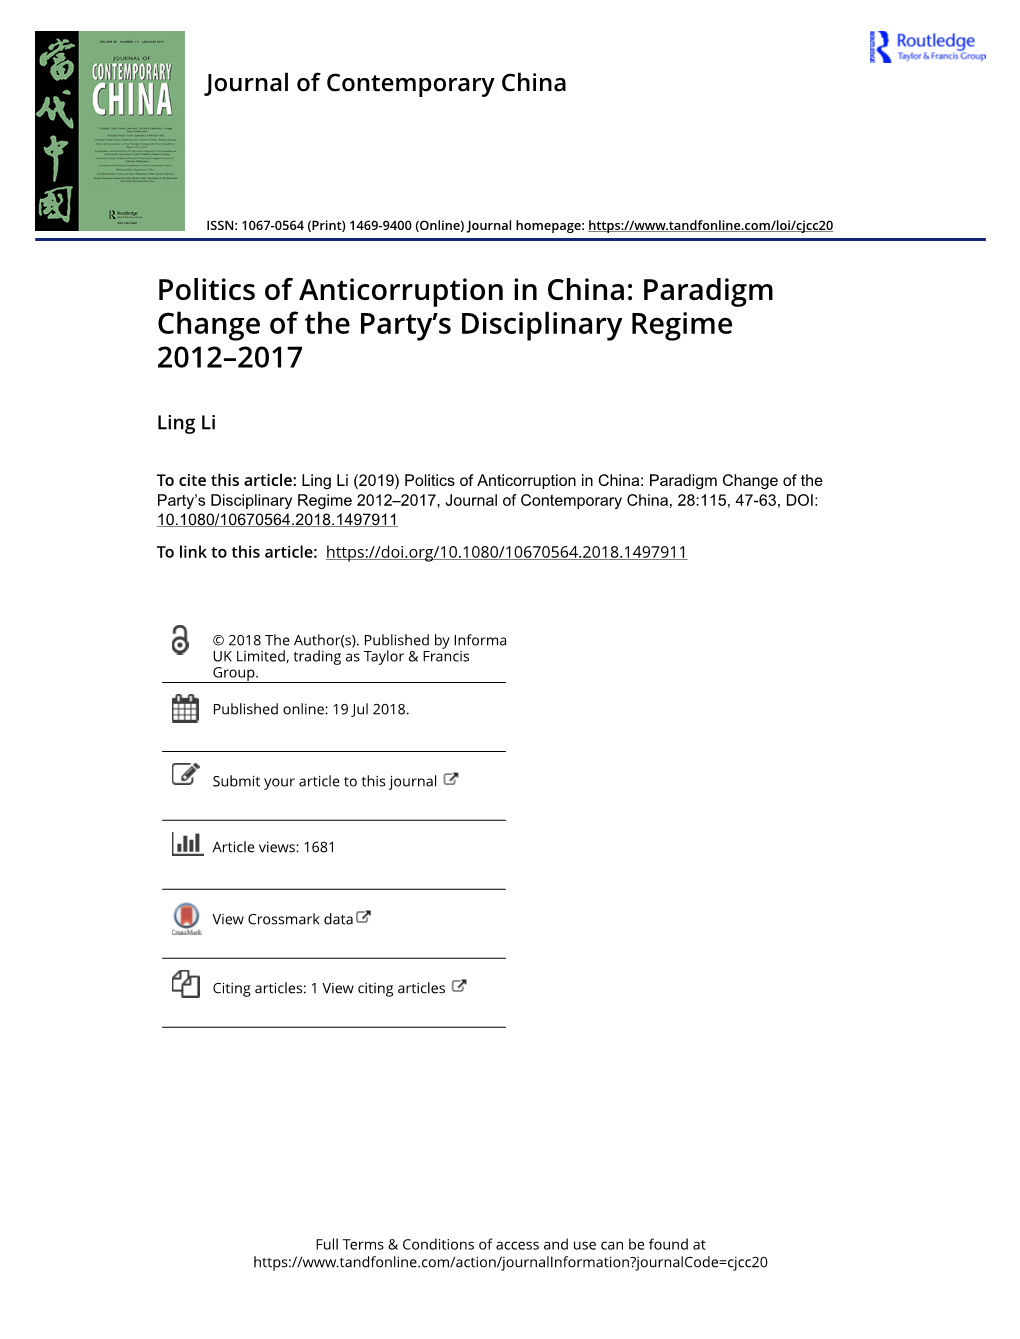 Politics of Anticorruption in China: Paradigm Change of the Party's